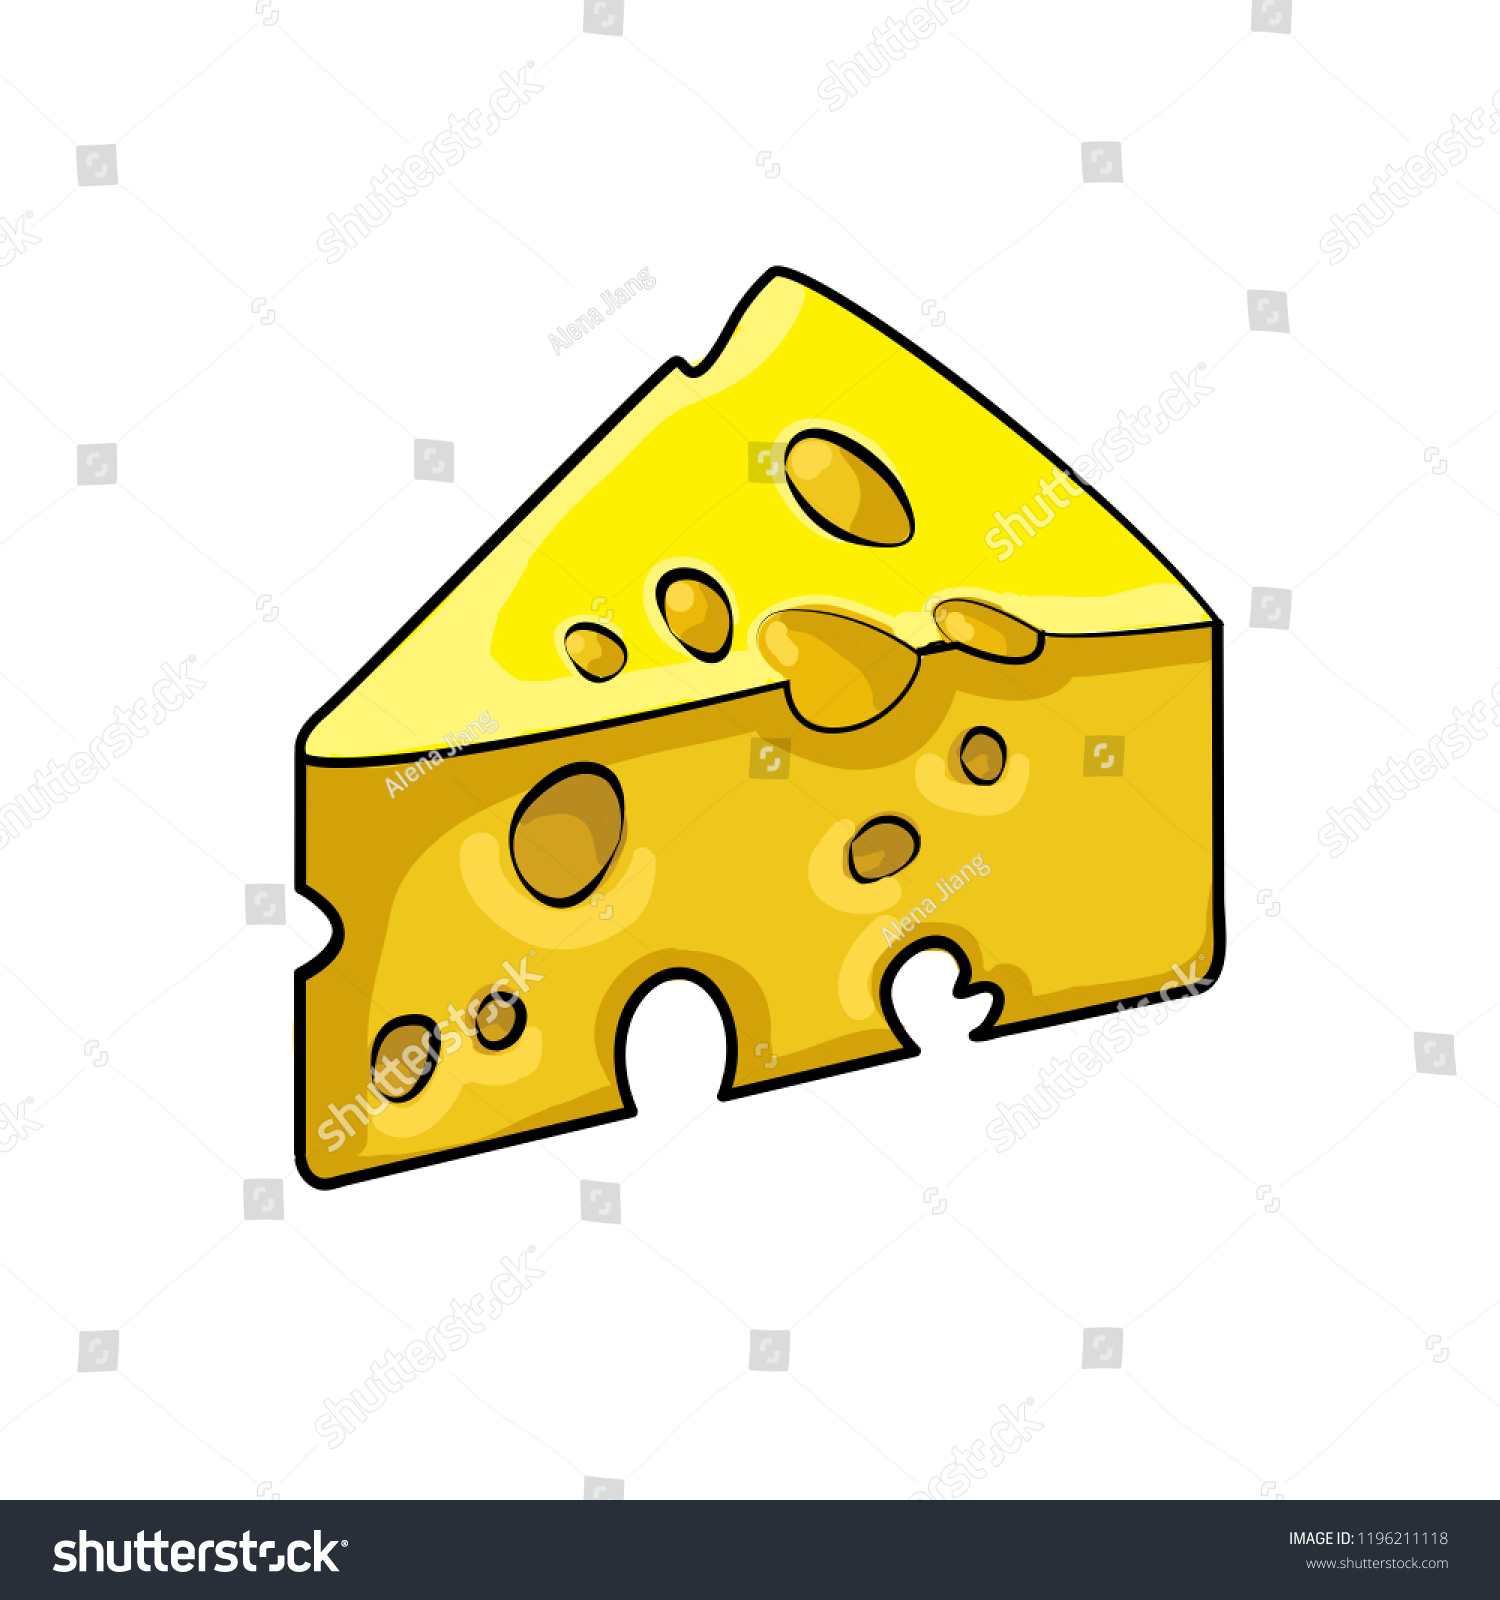 Download Yellow Slice Cheese Vector Illustration Cheese Stock Vector Royalty Free 1196211118 Yellowimages Mockups